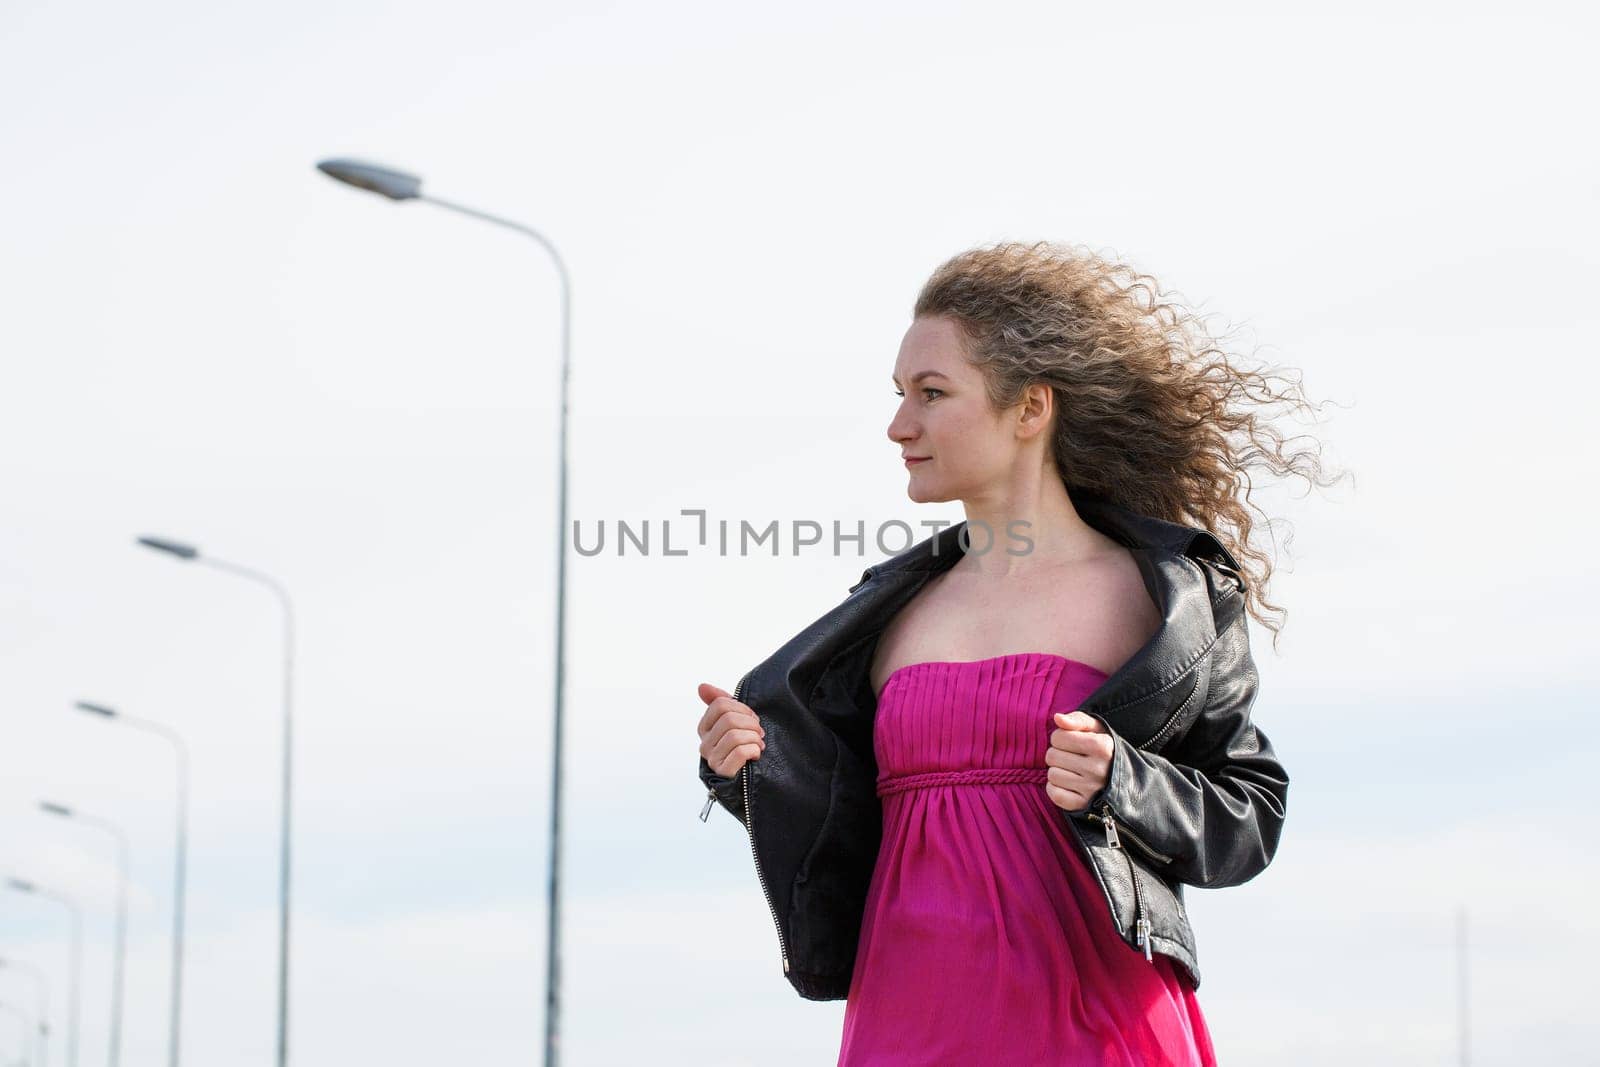 caucasian curly-haired woman in a black leather jacket and a pink dress against the background of a cloudy sky and pillars with lanterns